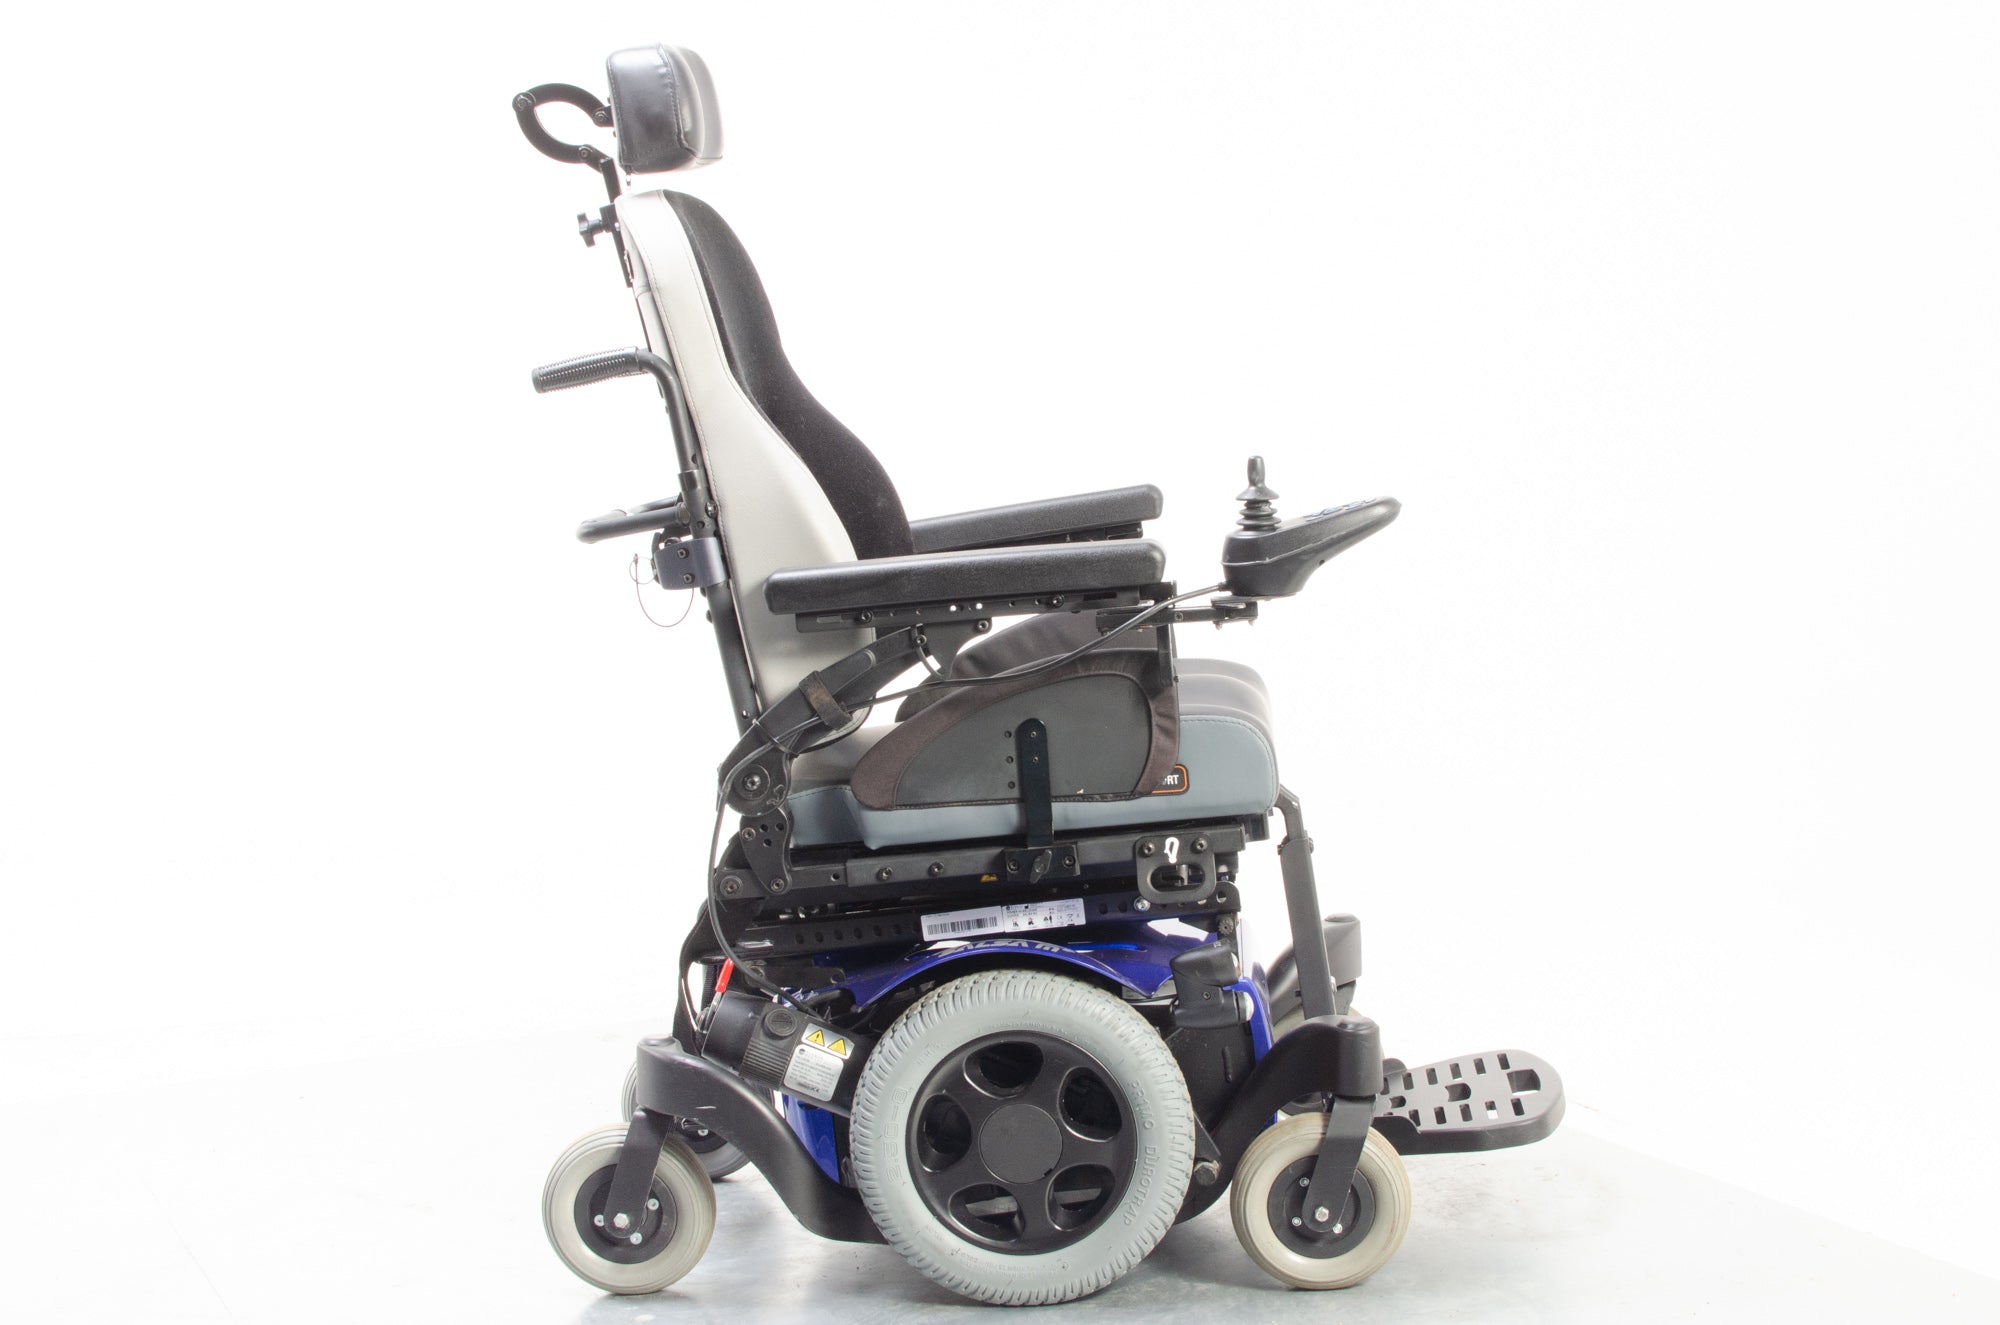 Quickie Salsa M2 6mph Used Electric Wheelchair Powerchair Power Tilt Sunrise Medical MWD Outdoor